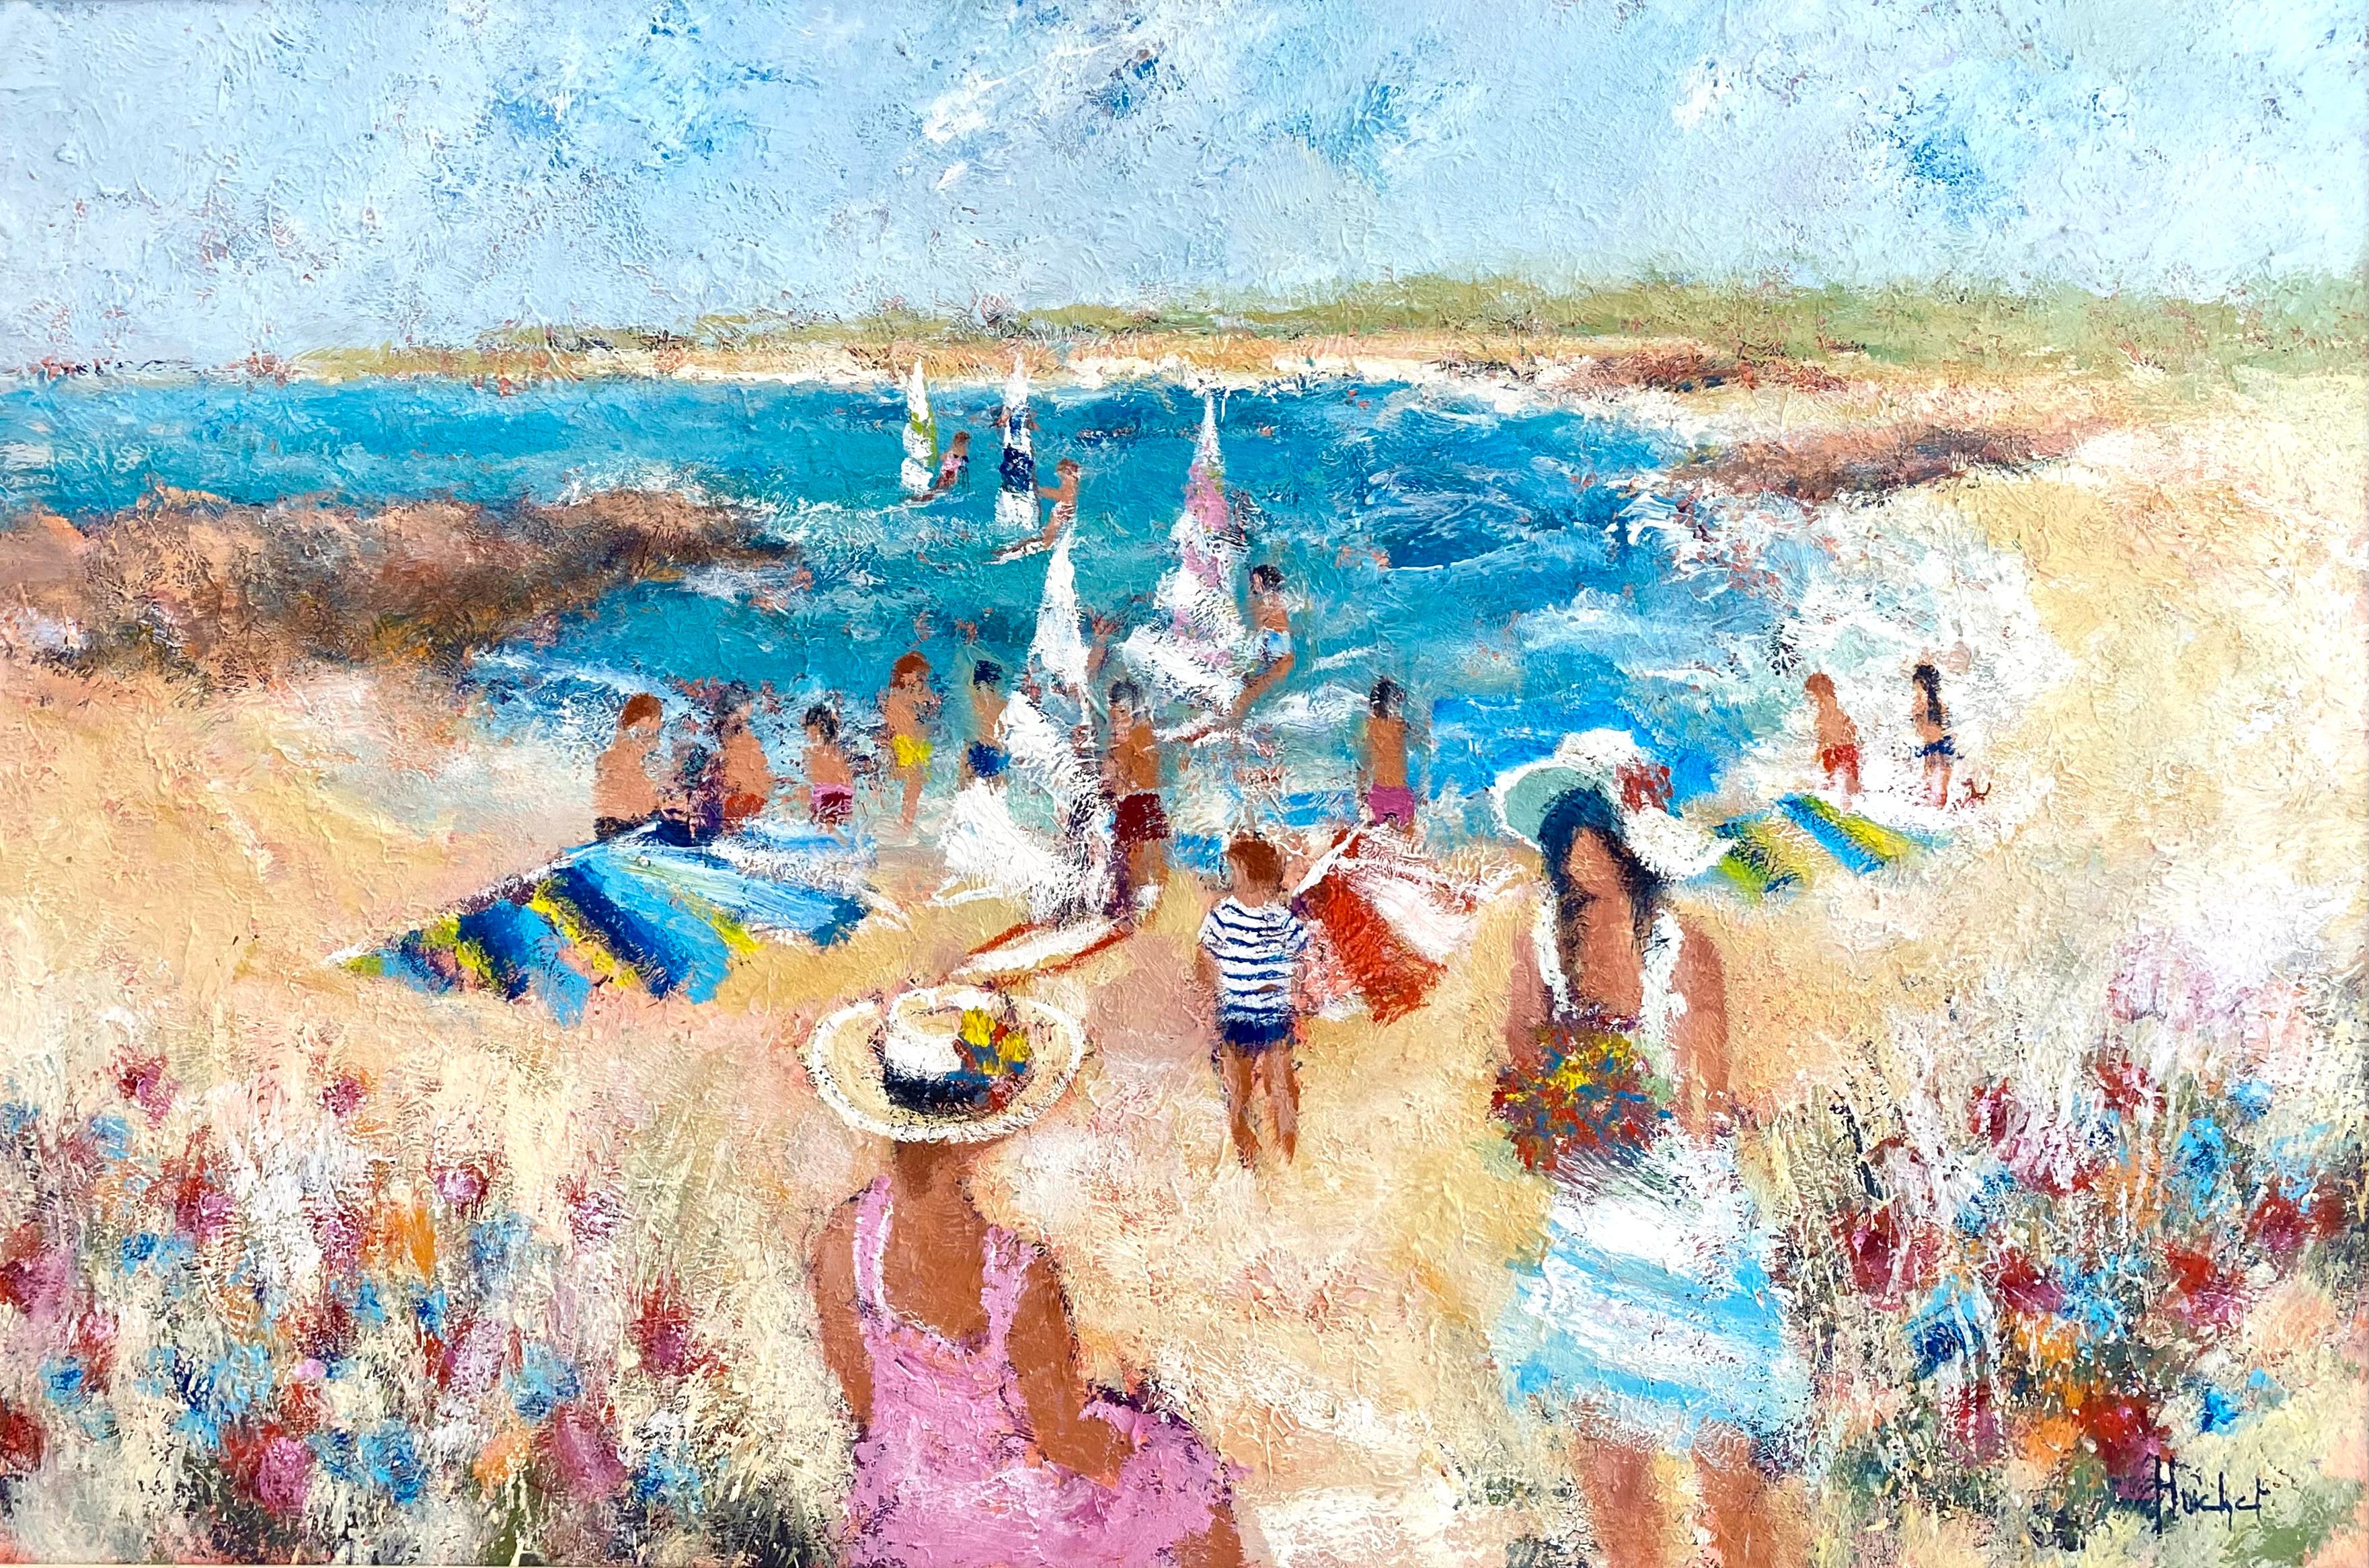 “A Day at the Beach” - Painting by Urbain Huchet